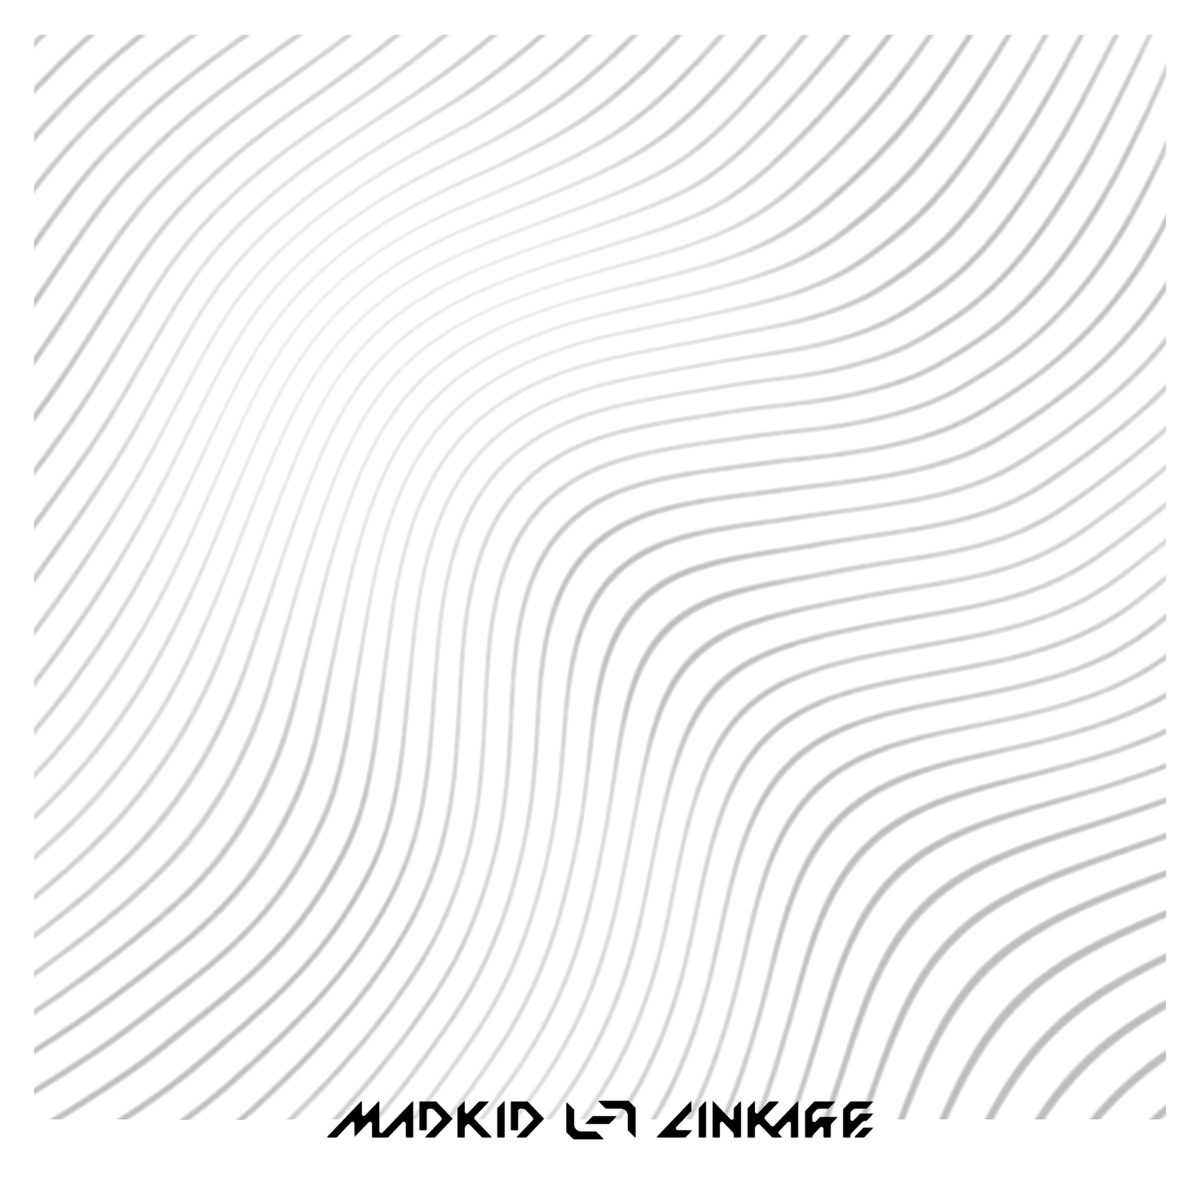 Cover for『MADKID - LINKAGE』from the release『LINKAGE』